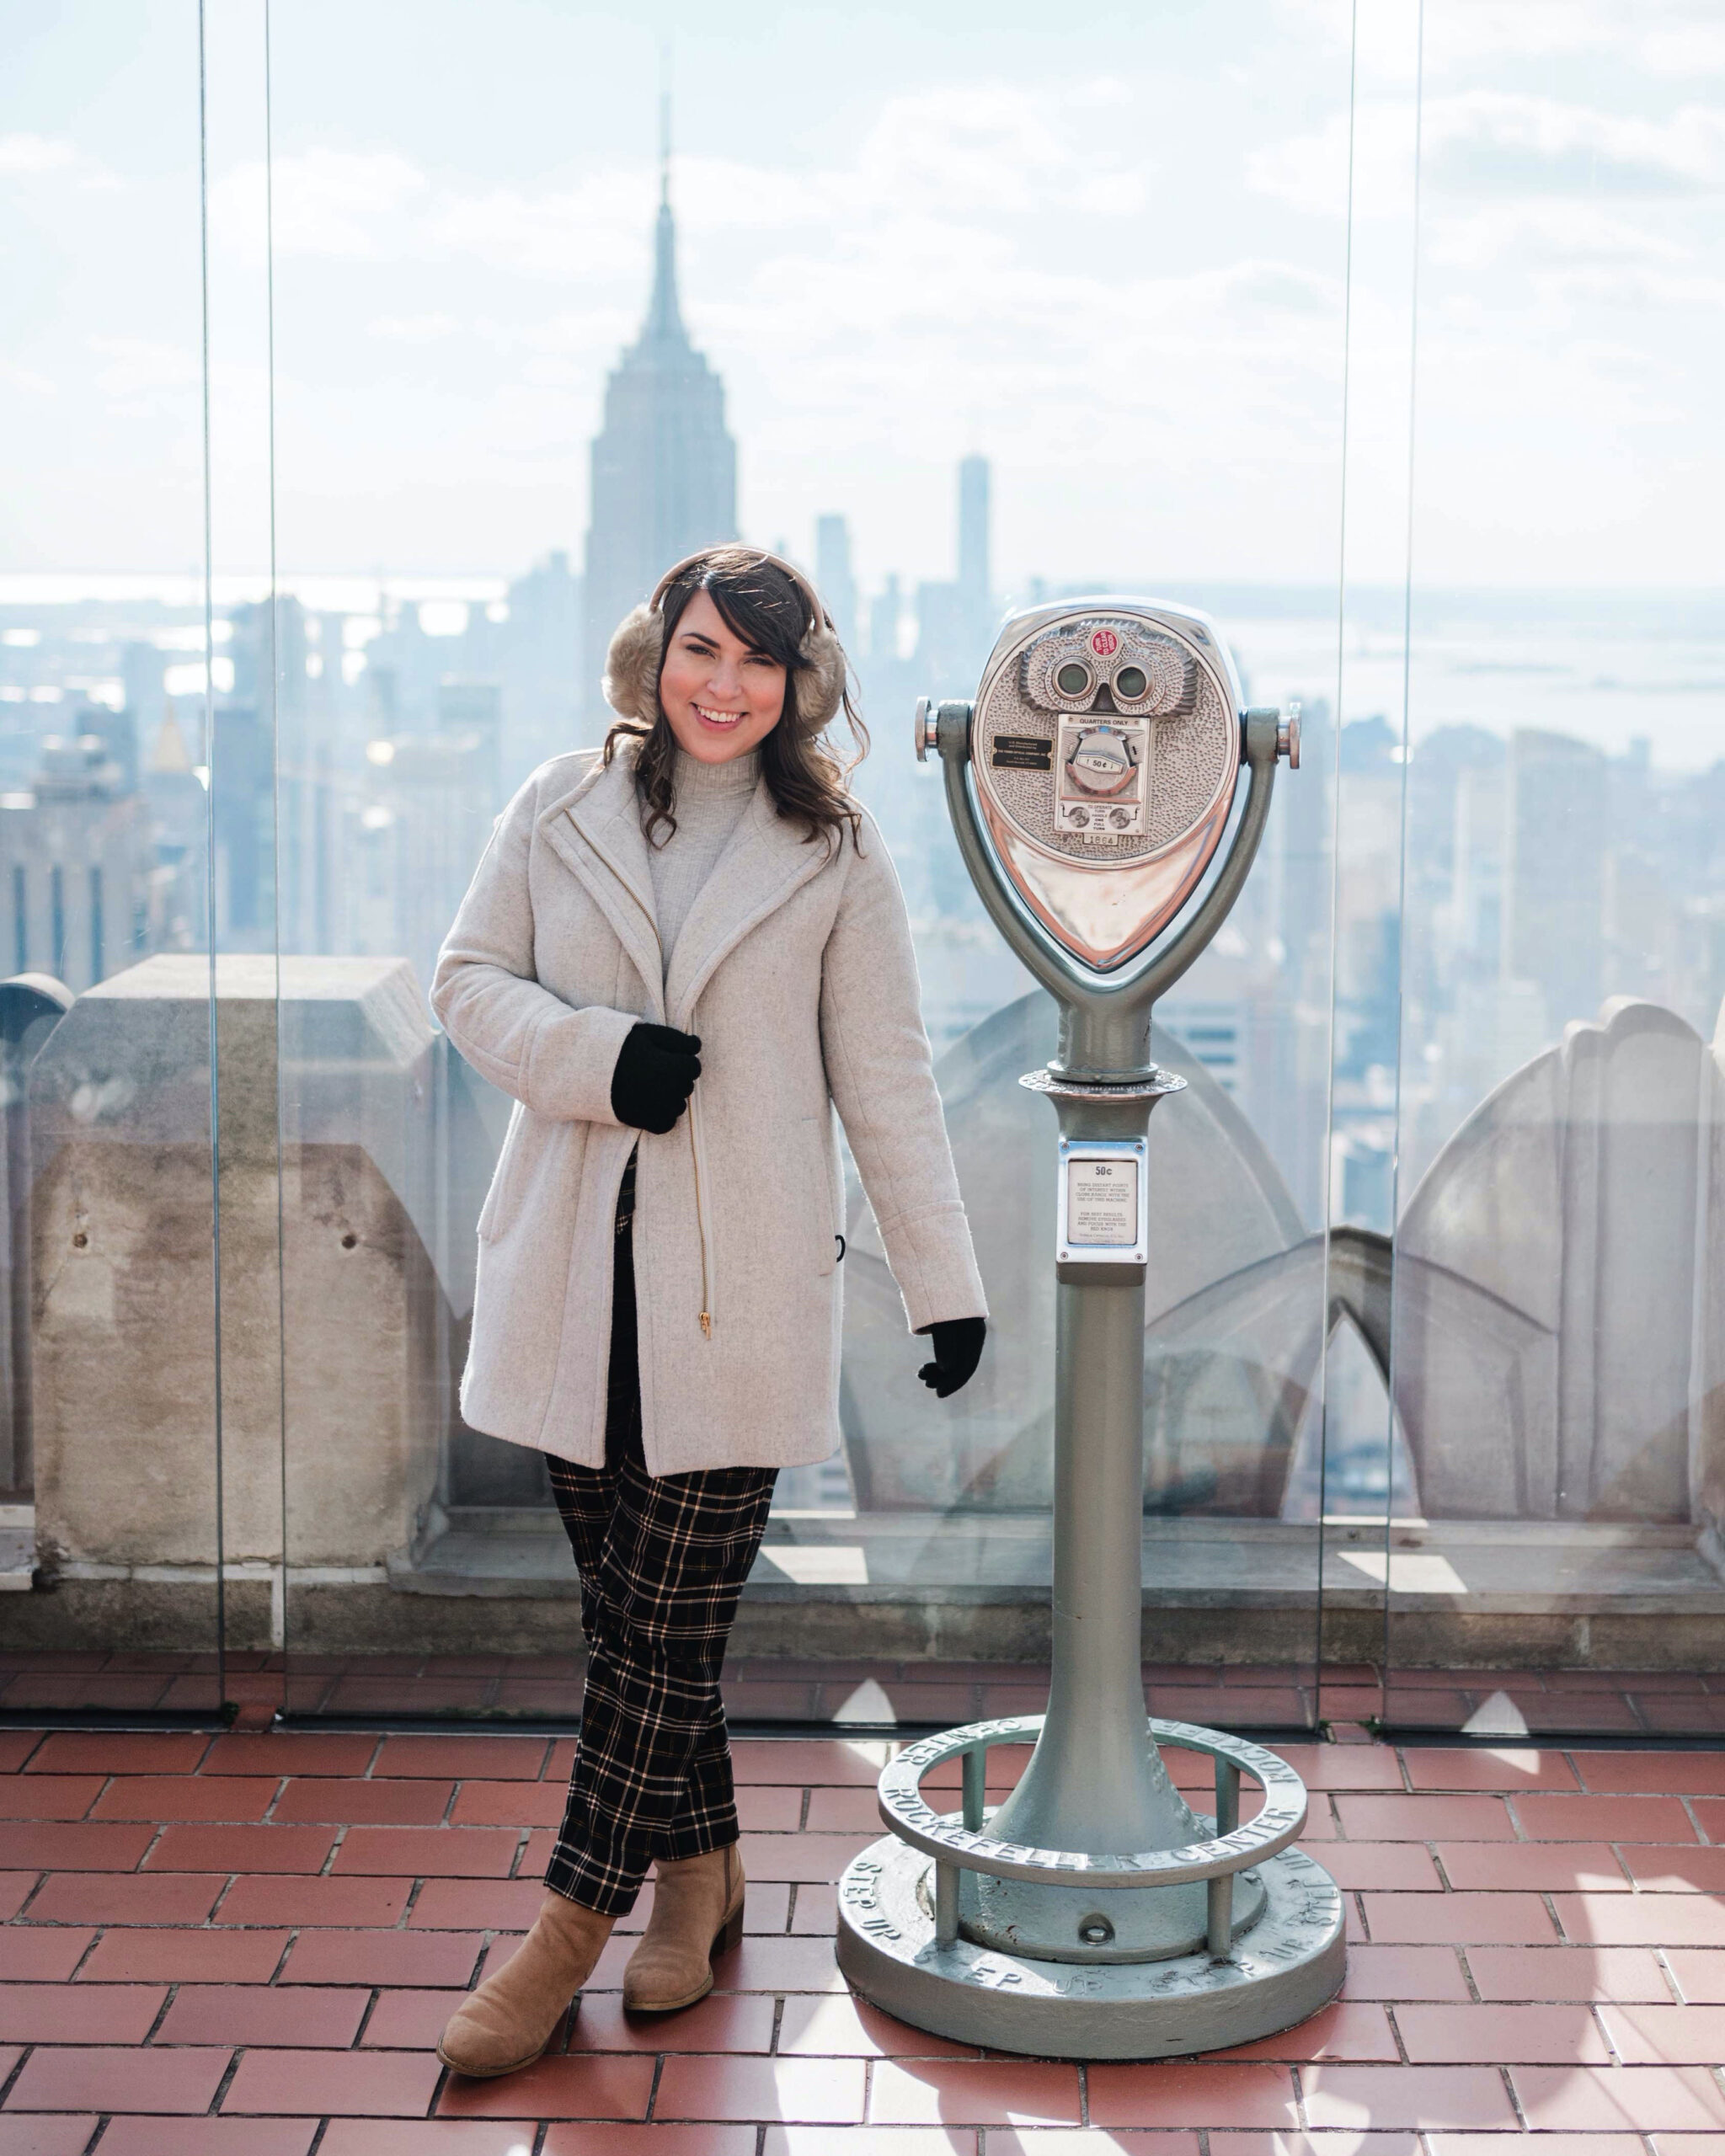 Brittney Naylor wearing black plaid pants, brown boots, grey petticoat, black gloves, and ear muffs on top of the rockefeller plaza with views of the empire state building and other sky scrapers in New York City. NYC Christmastime Bucket List Things to do.